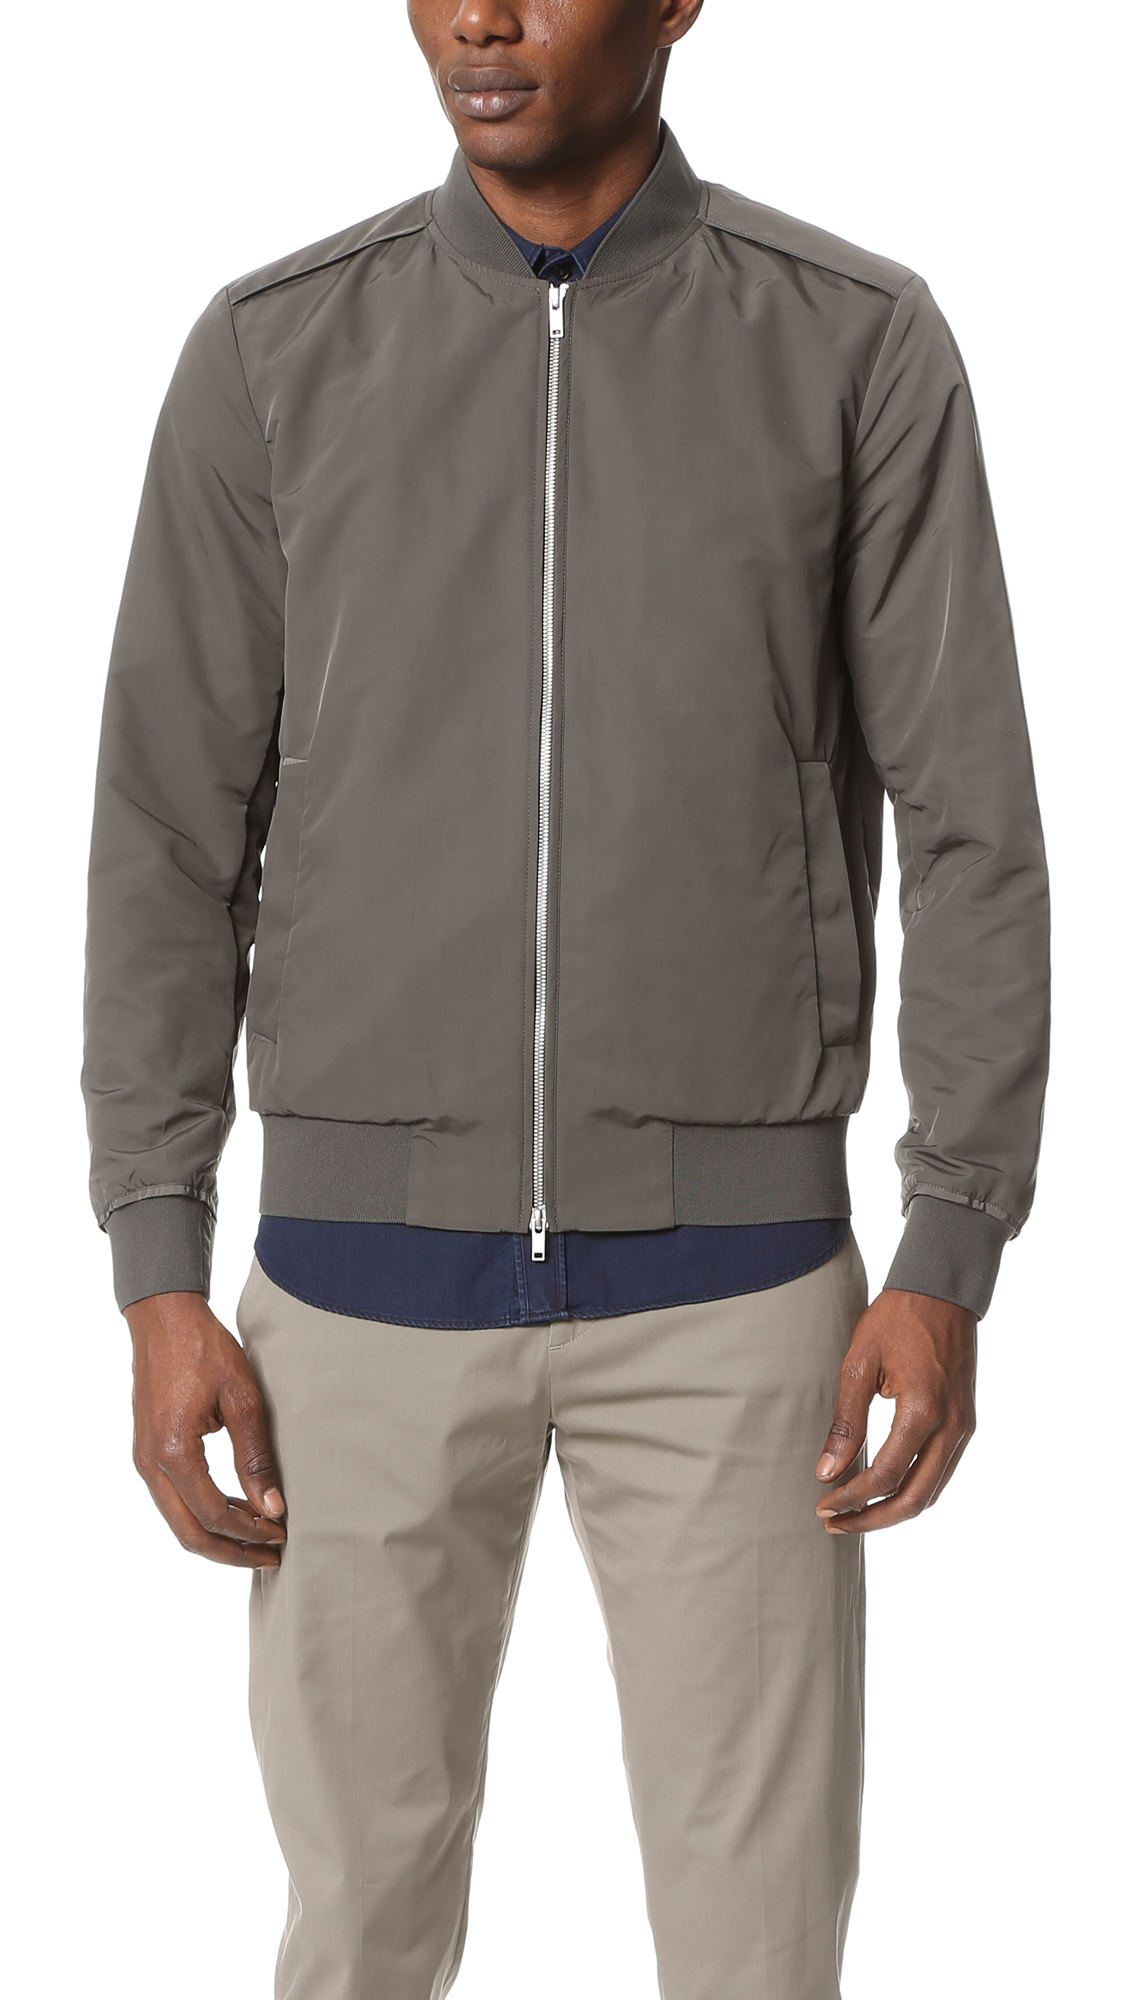 Lyst - Theory Brant Williston Bomber Jacket in Gray for Men